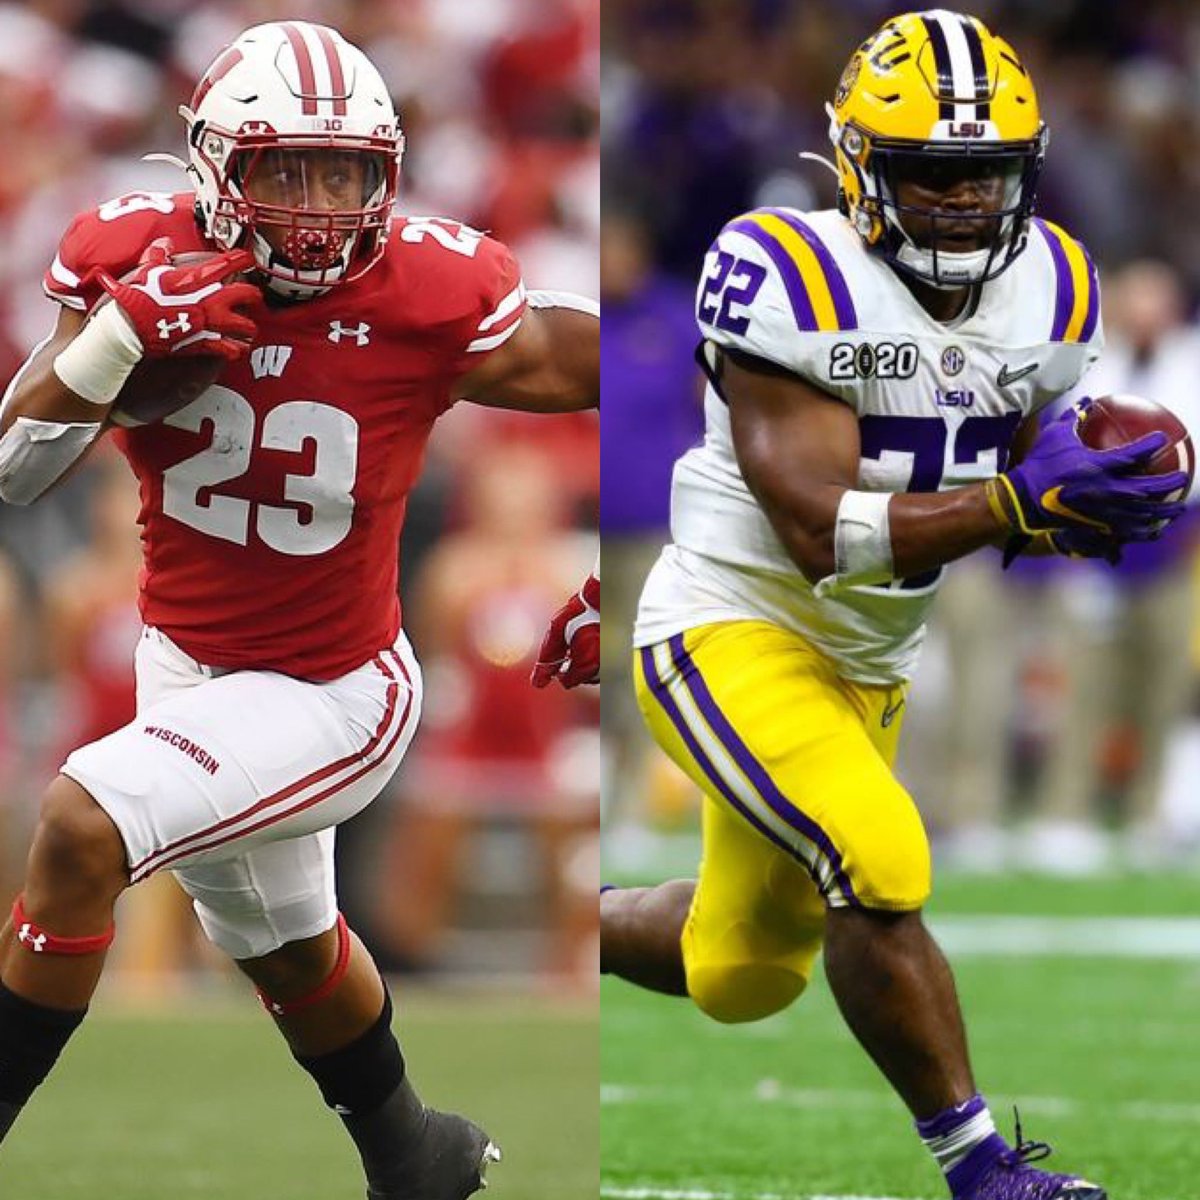 Why I believe Jonathan Taylor and CEH could be RB1s in year 1 - A Thread